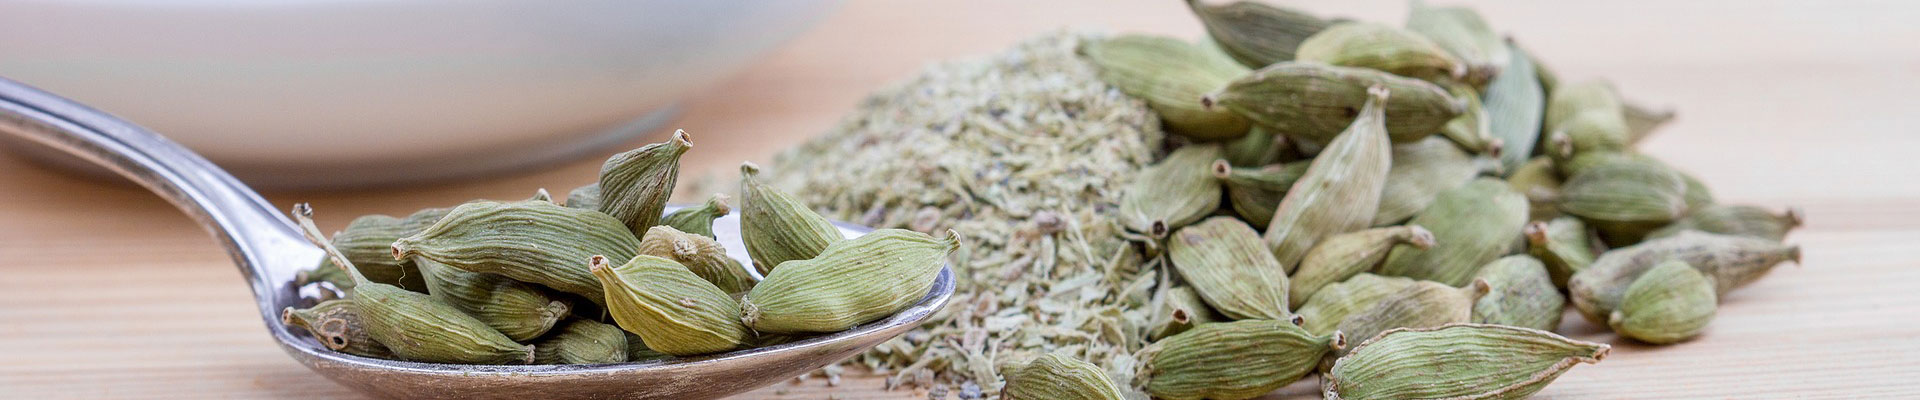 CARDAMOM-THE ANCIENT SPICE